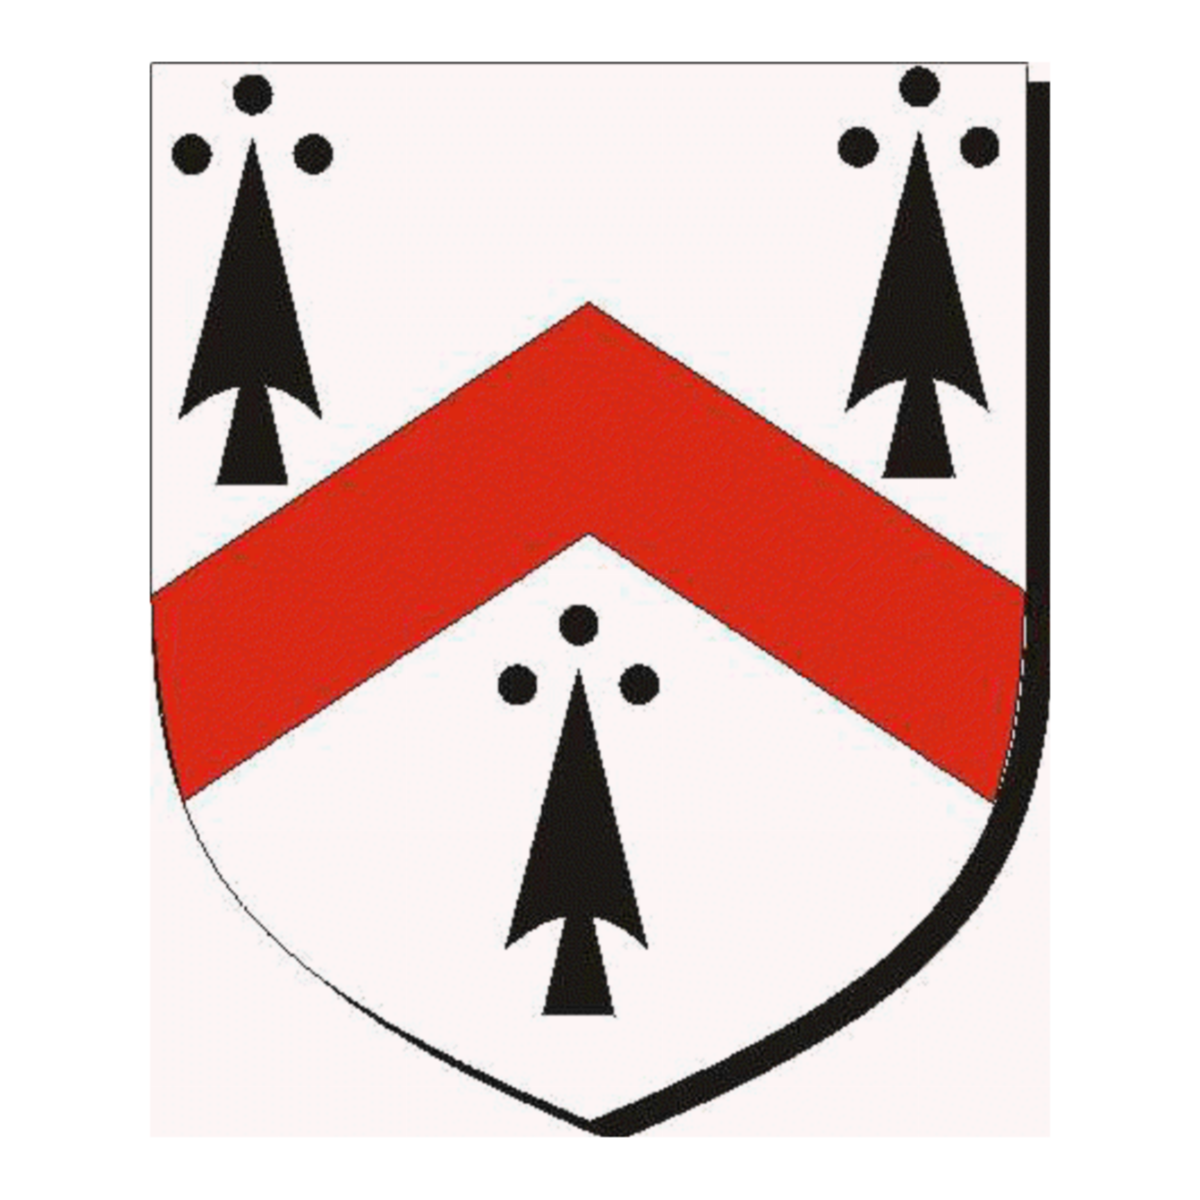 Coat of arms of familyPotter